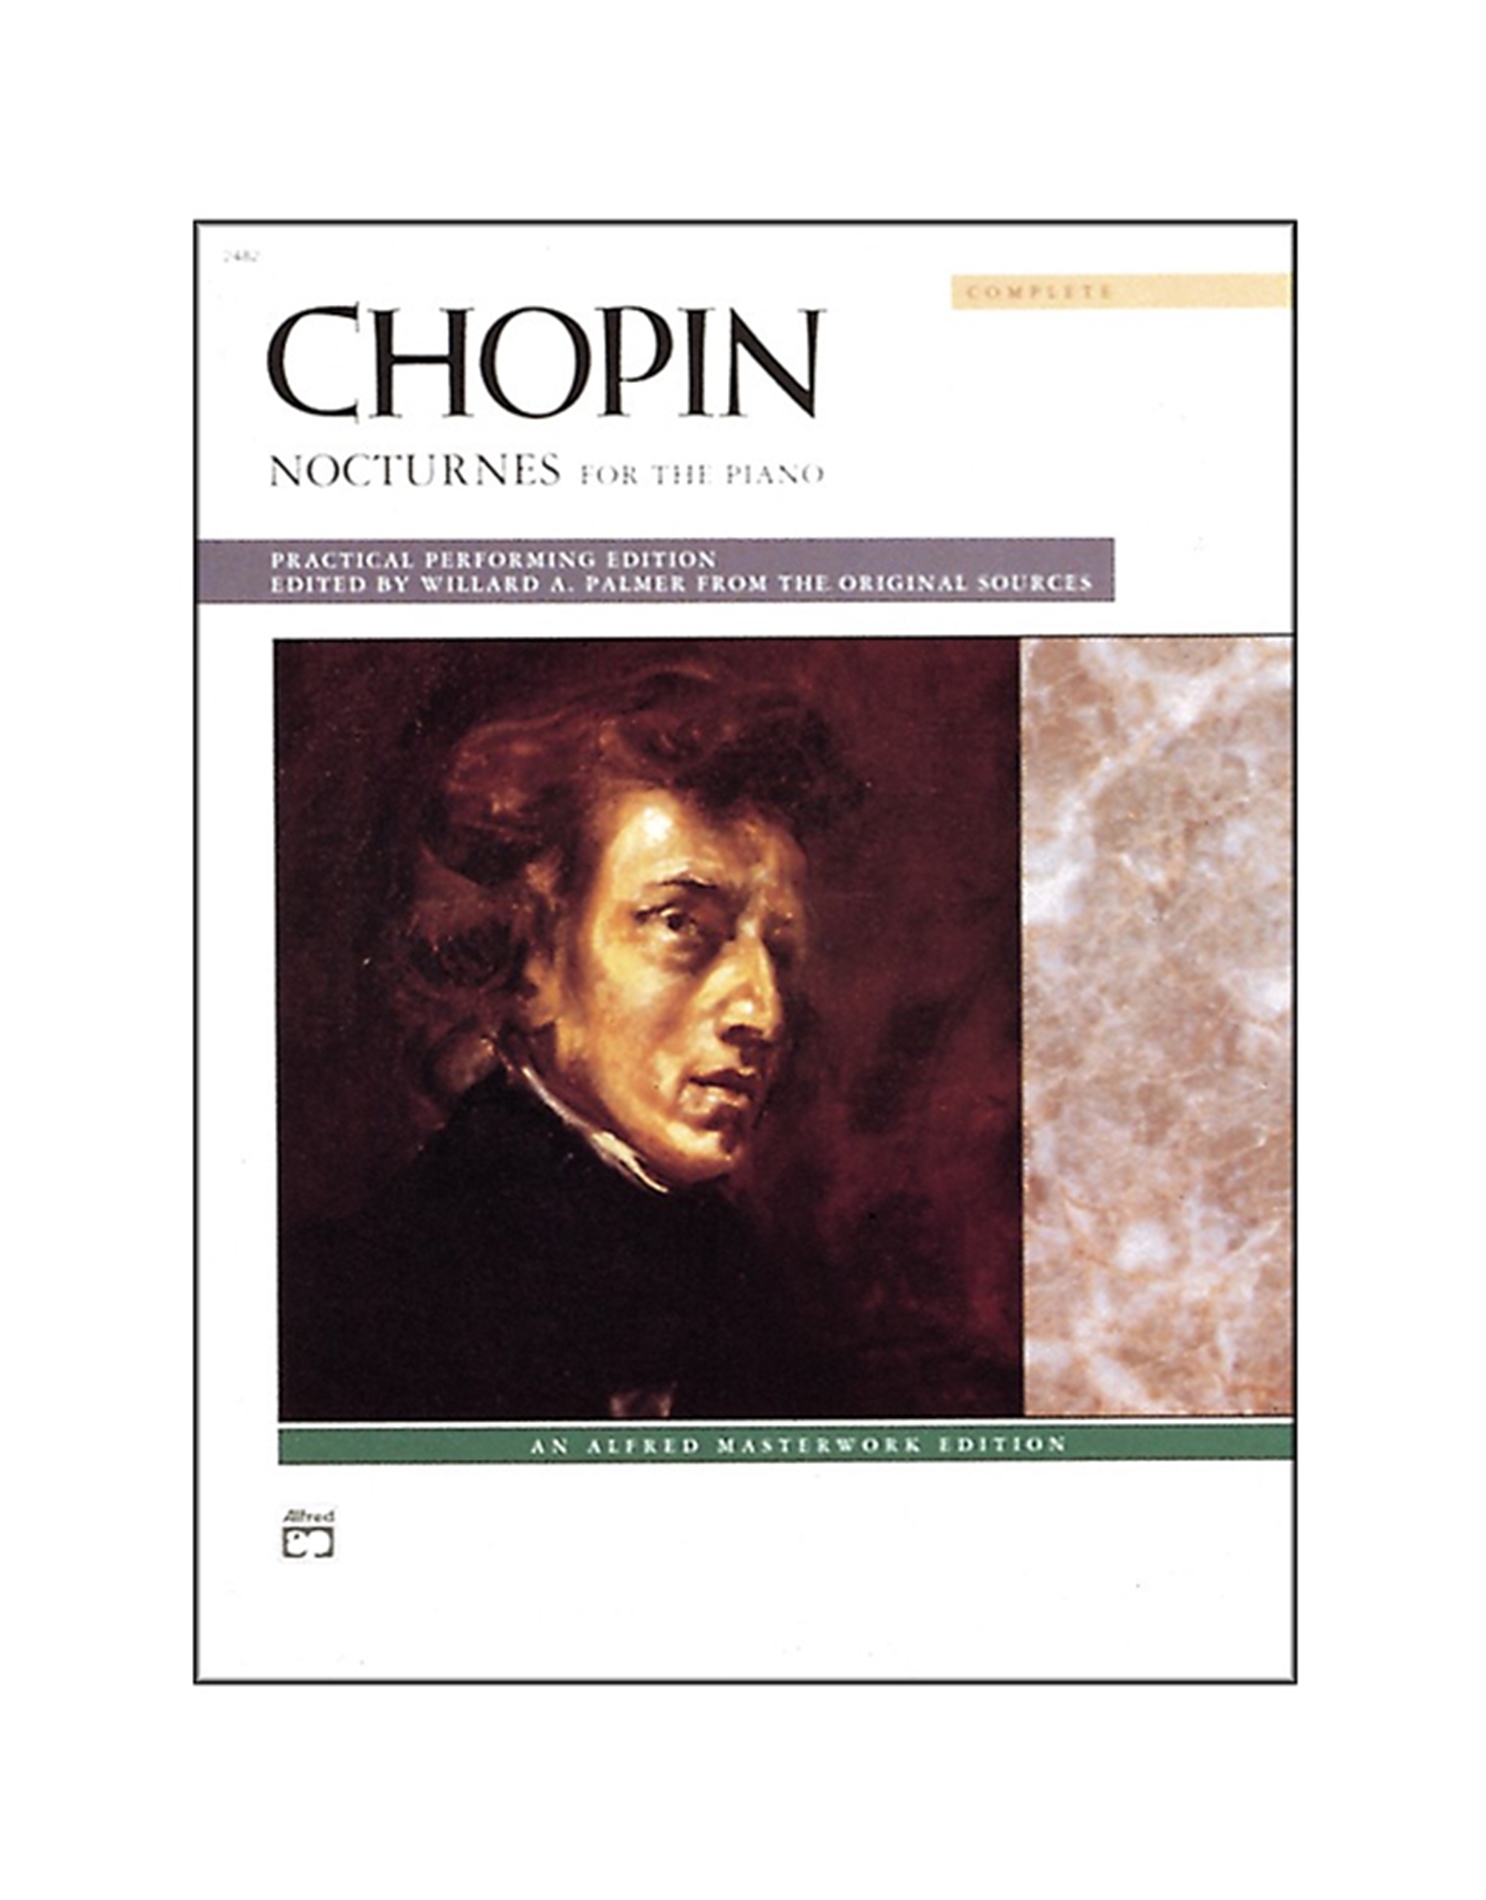 Nakas　Alfred　(complete)　Piano　Cyprus　Frederic　Music　Chopin　Nocturnes　Edition　Solo